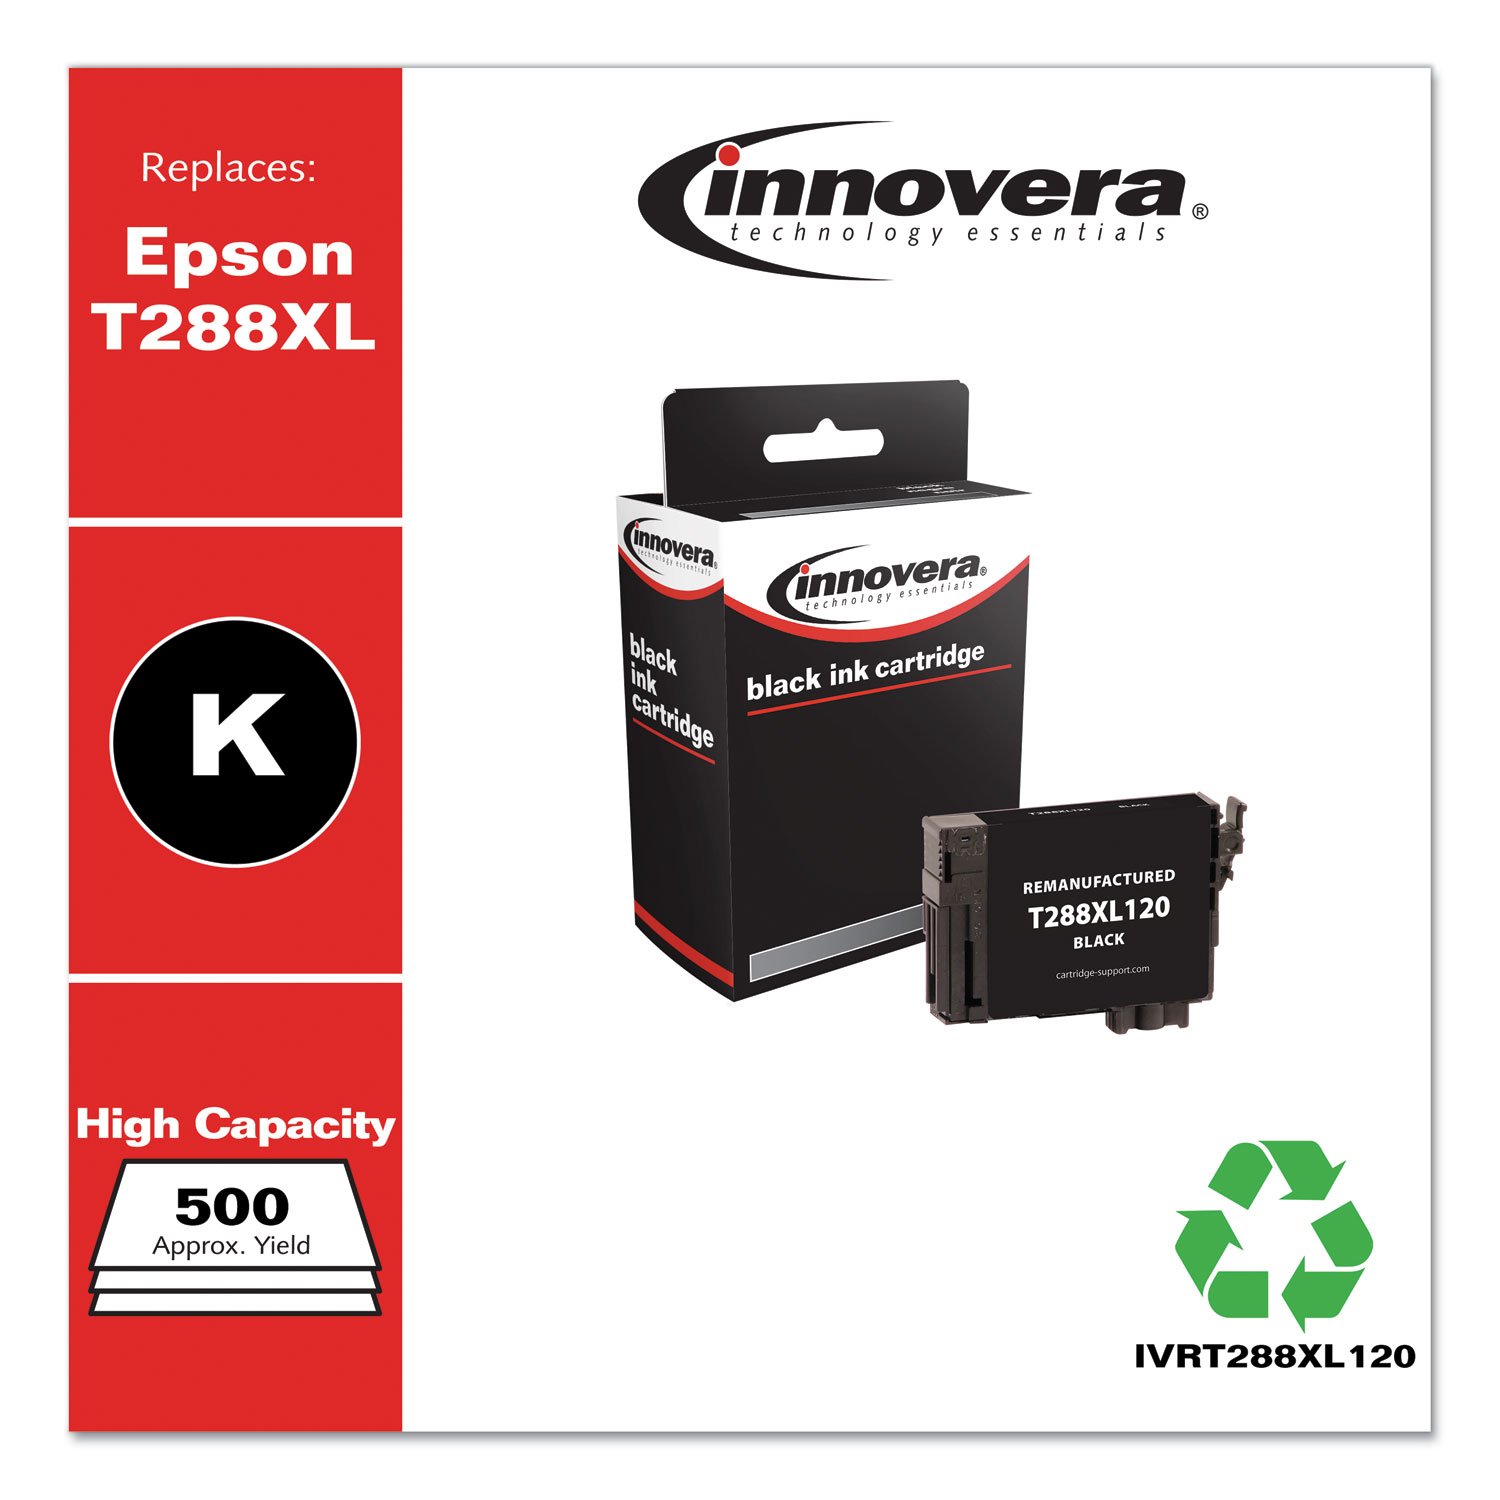  Innovera IVRT288XL120 Remanufactured Black High-Yield Ink, Replacement for Epson T288XL (T288XL120), 500 Page-Yield (IVRT288XL120) 